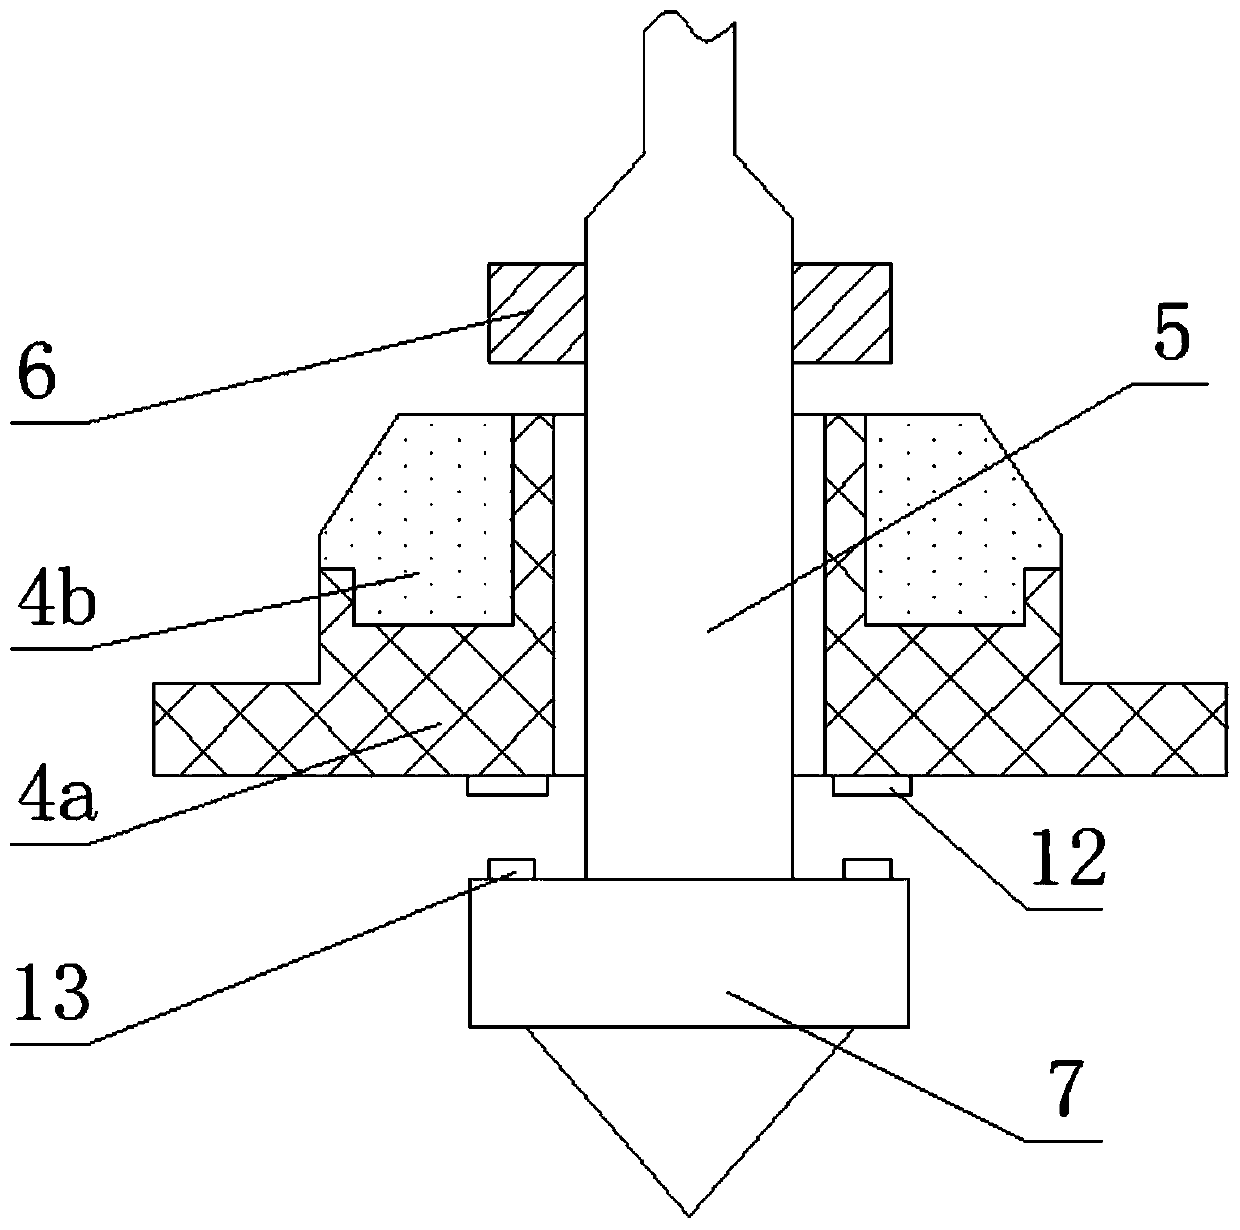 Control structure of fire-fighting extinguisher valve